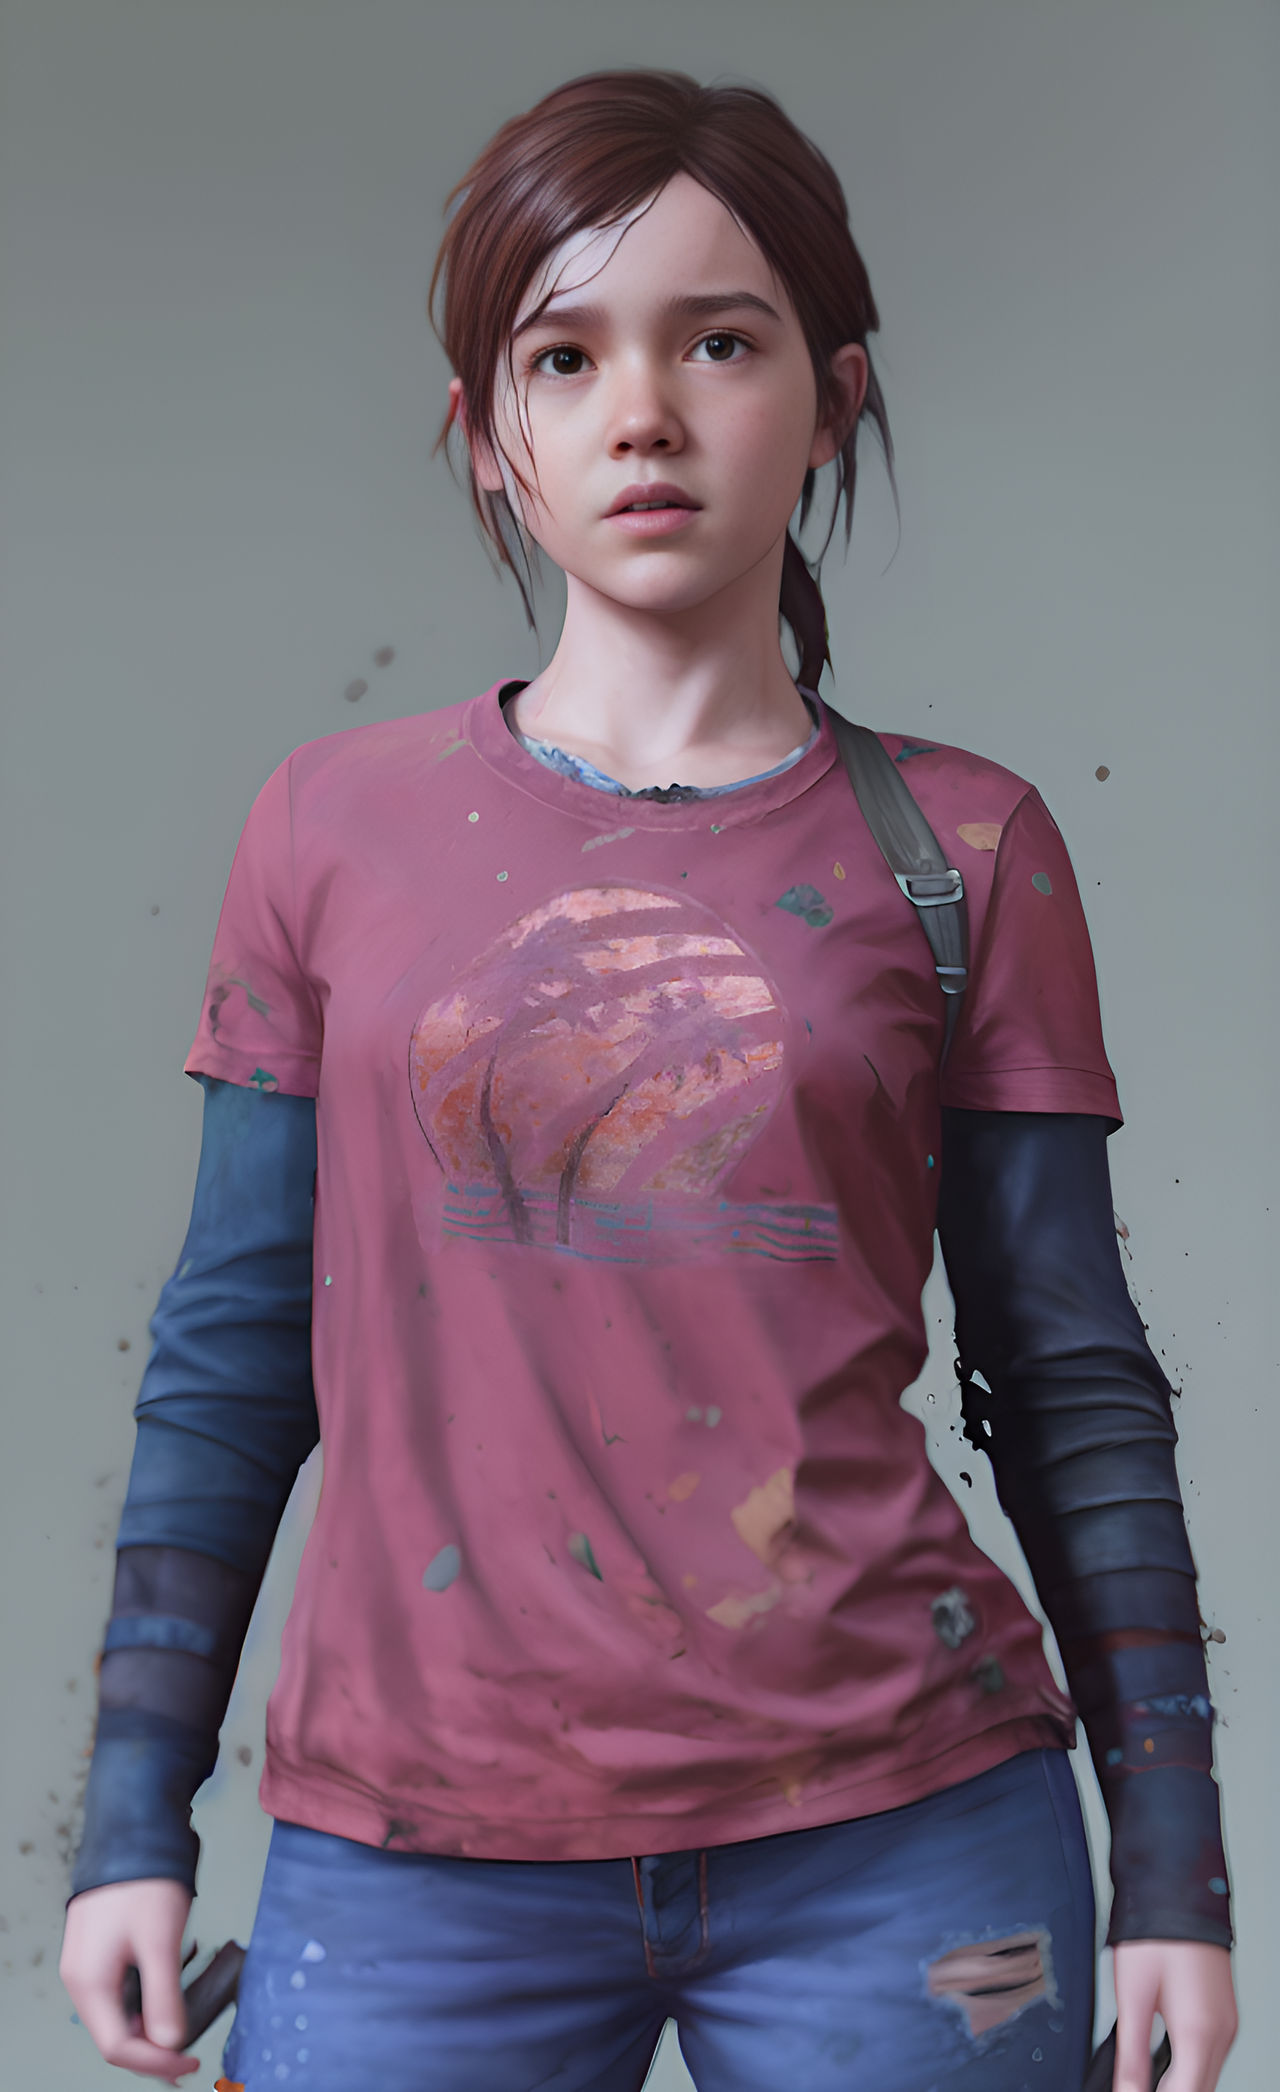 The Last Of Us- Ellie with rifle by Zaza-Boom on DeviantArt